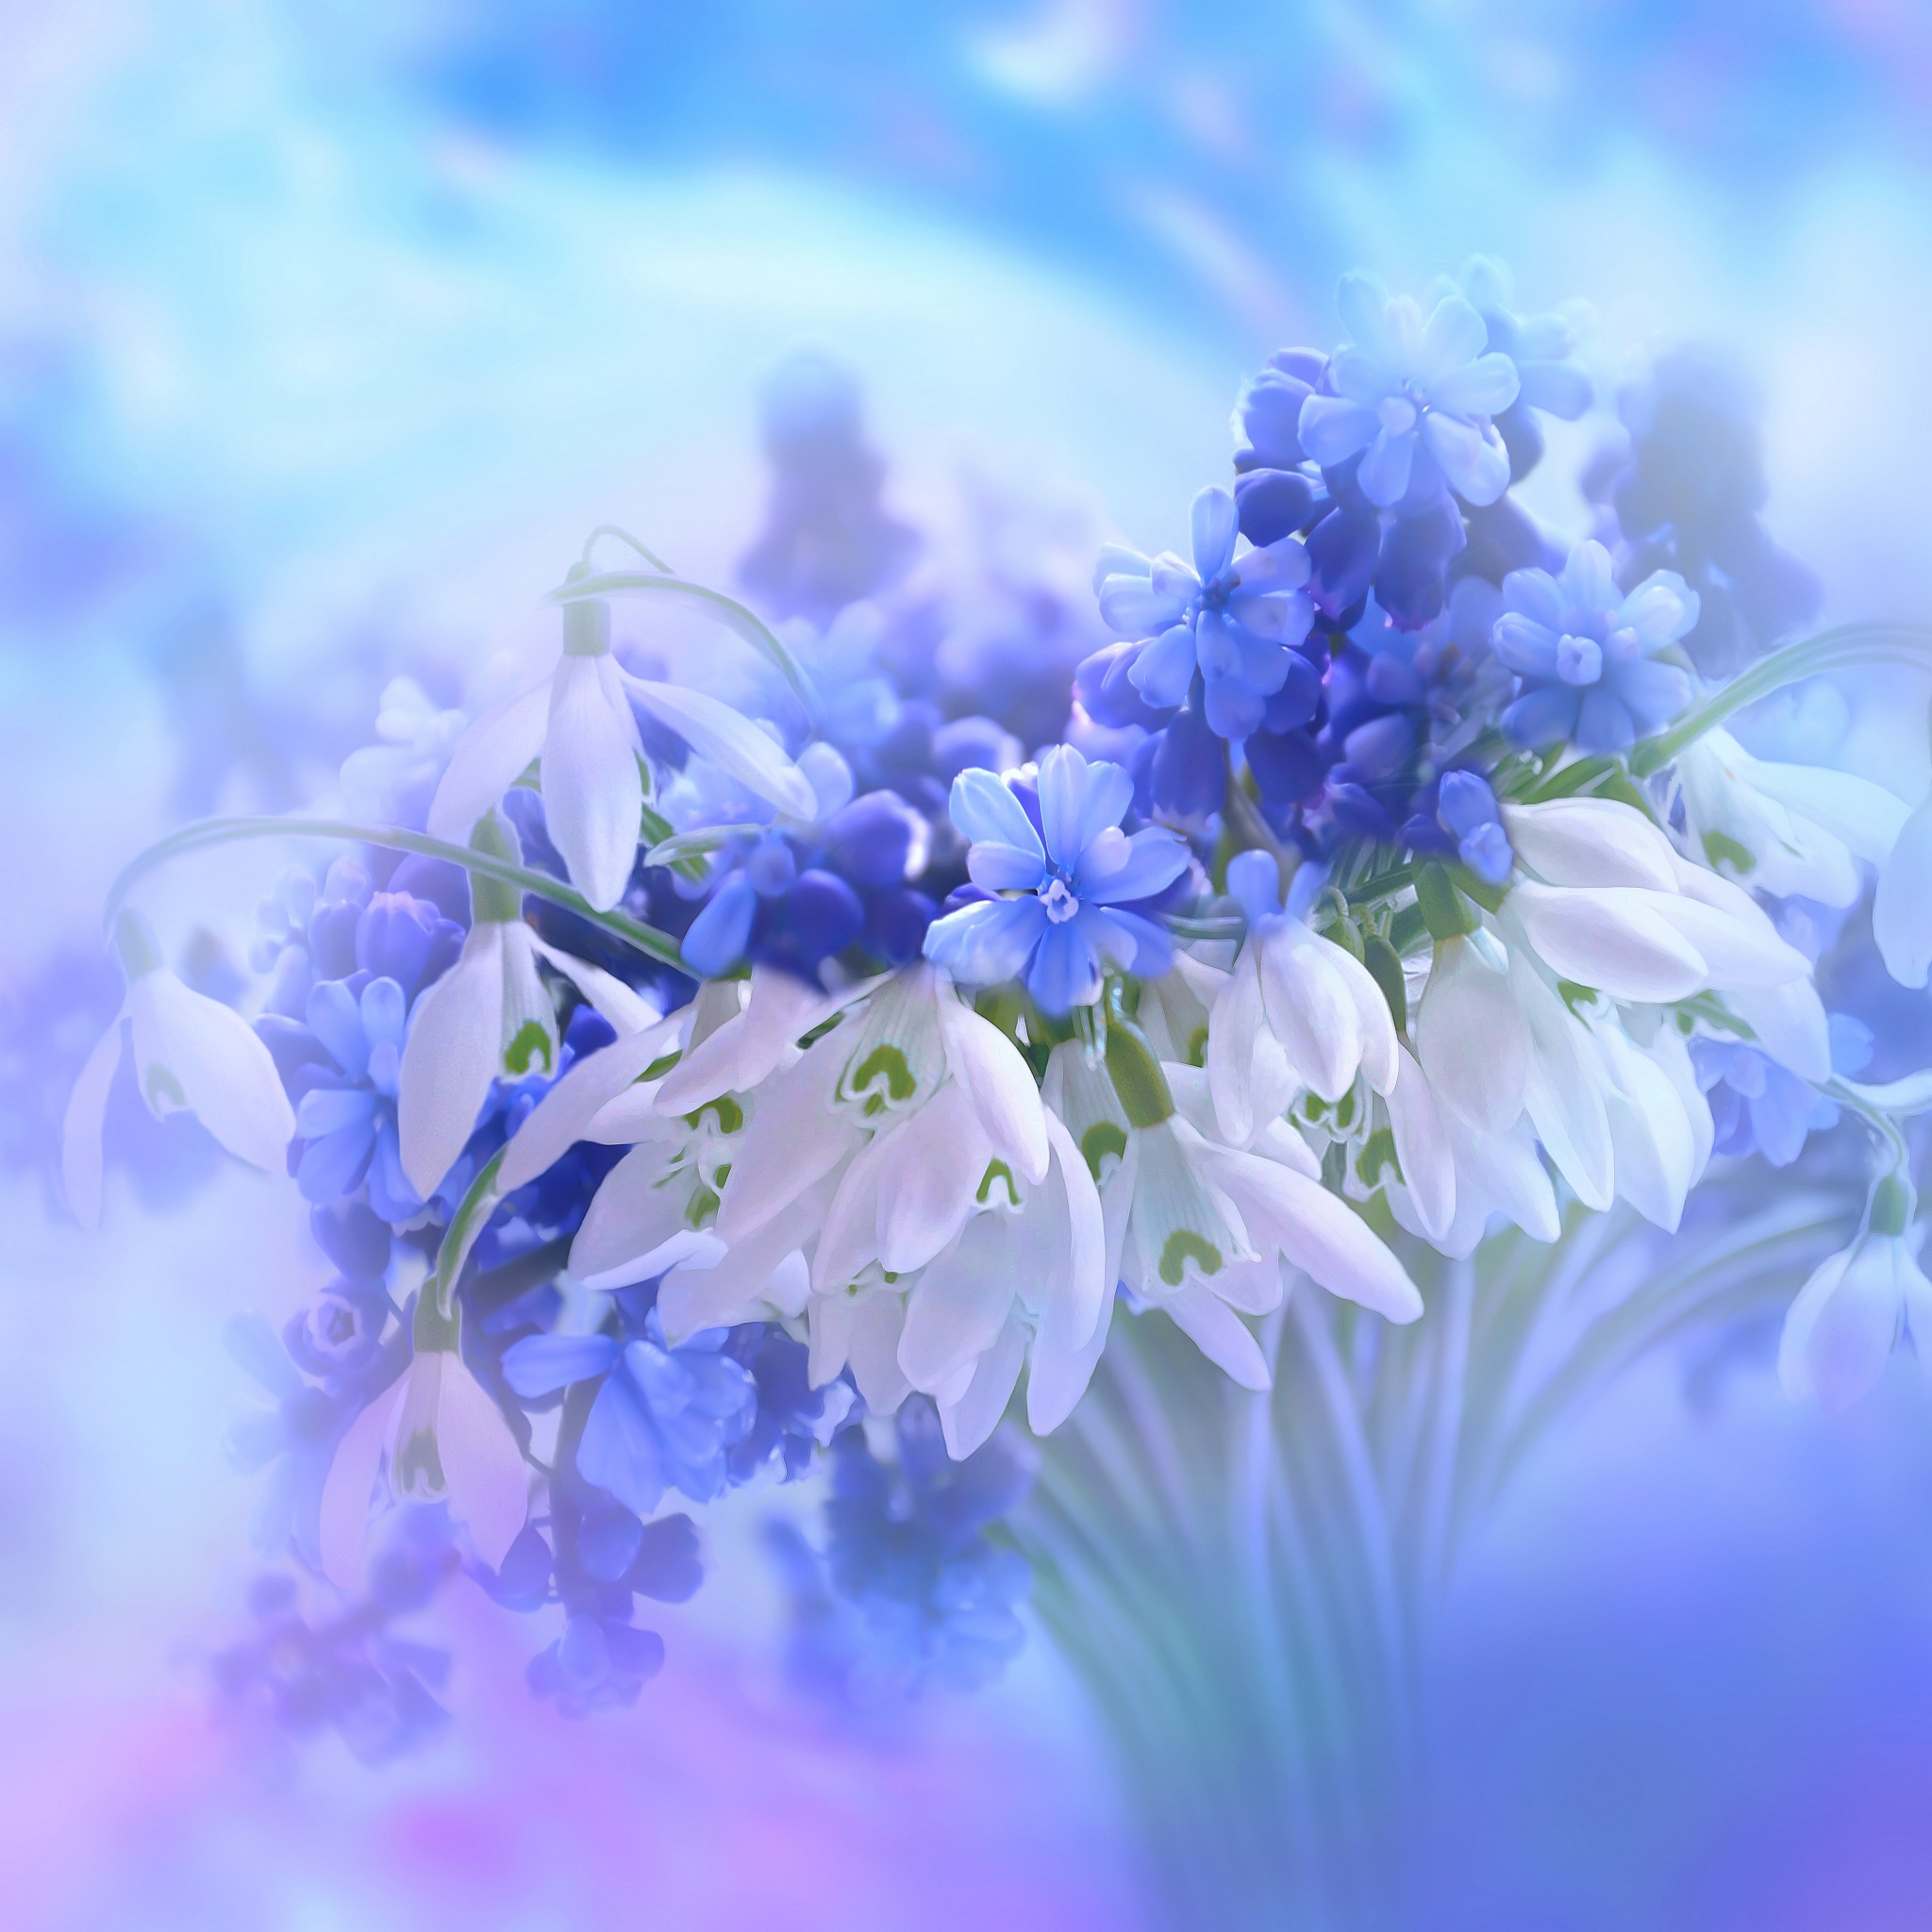 Grape Hyacinth Wallpaper - iPhone, Android & Desktop Backgrounds